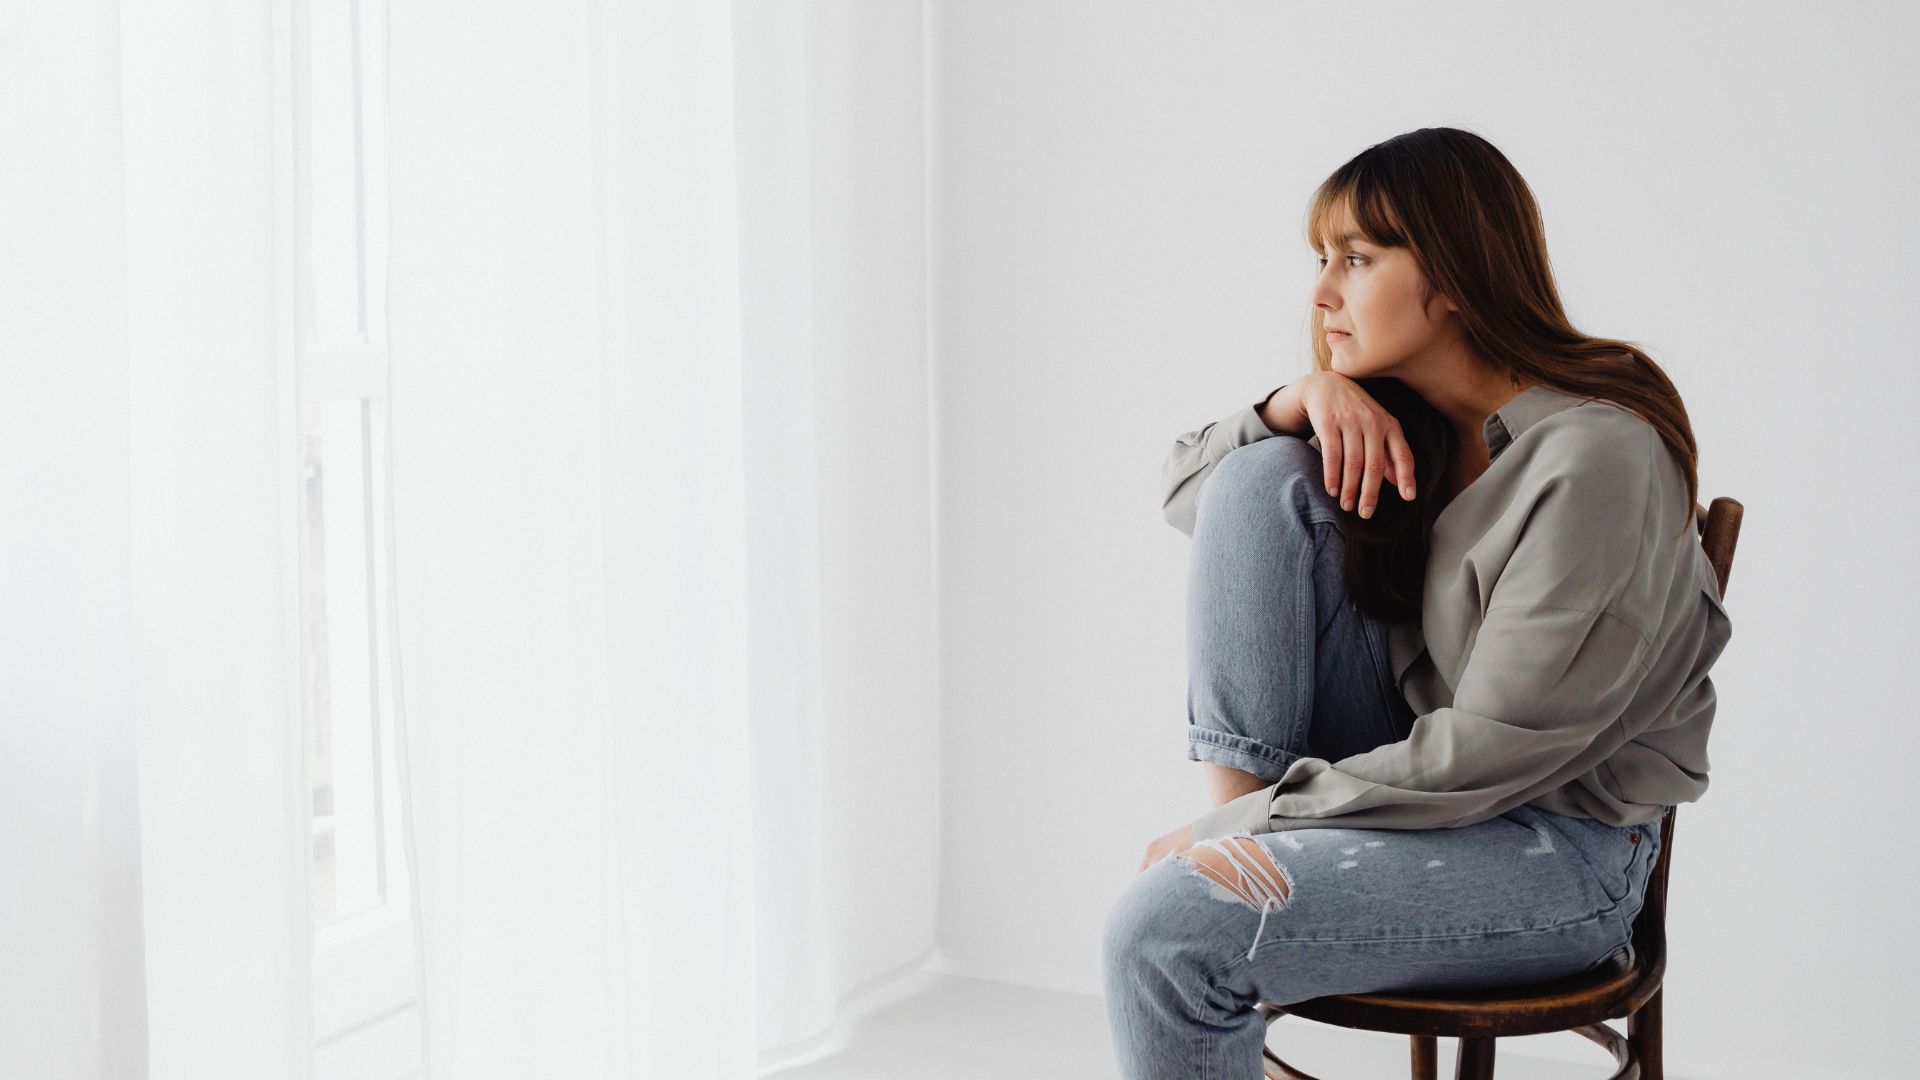 A Woman in Gray Long Sleeves Sitting on Chair Looking Pensive